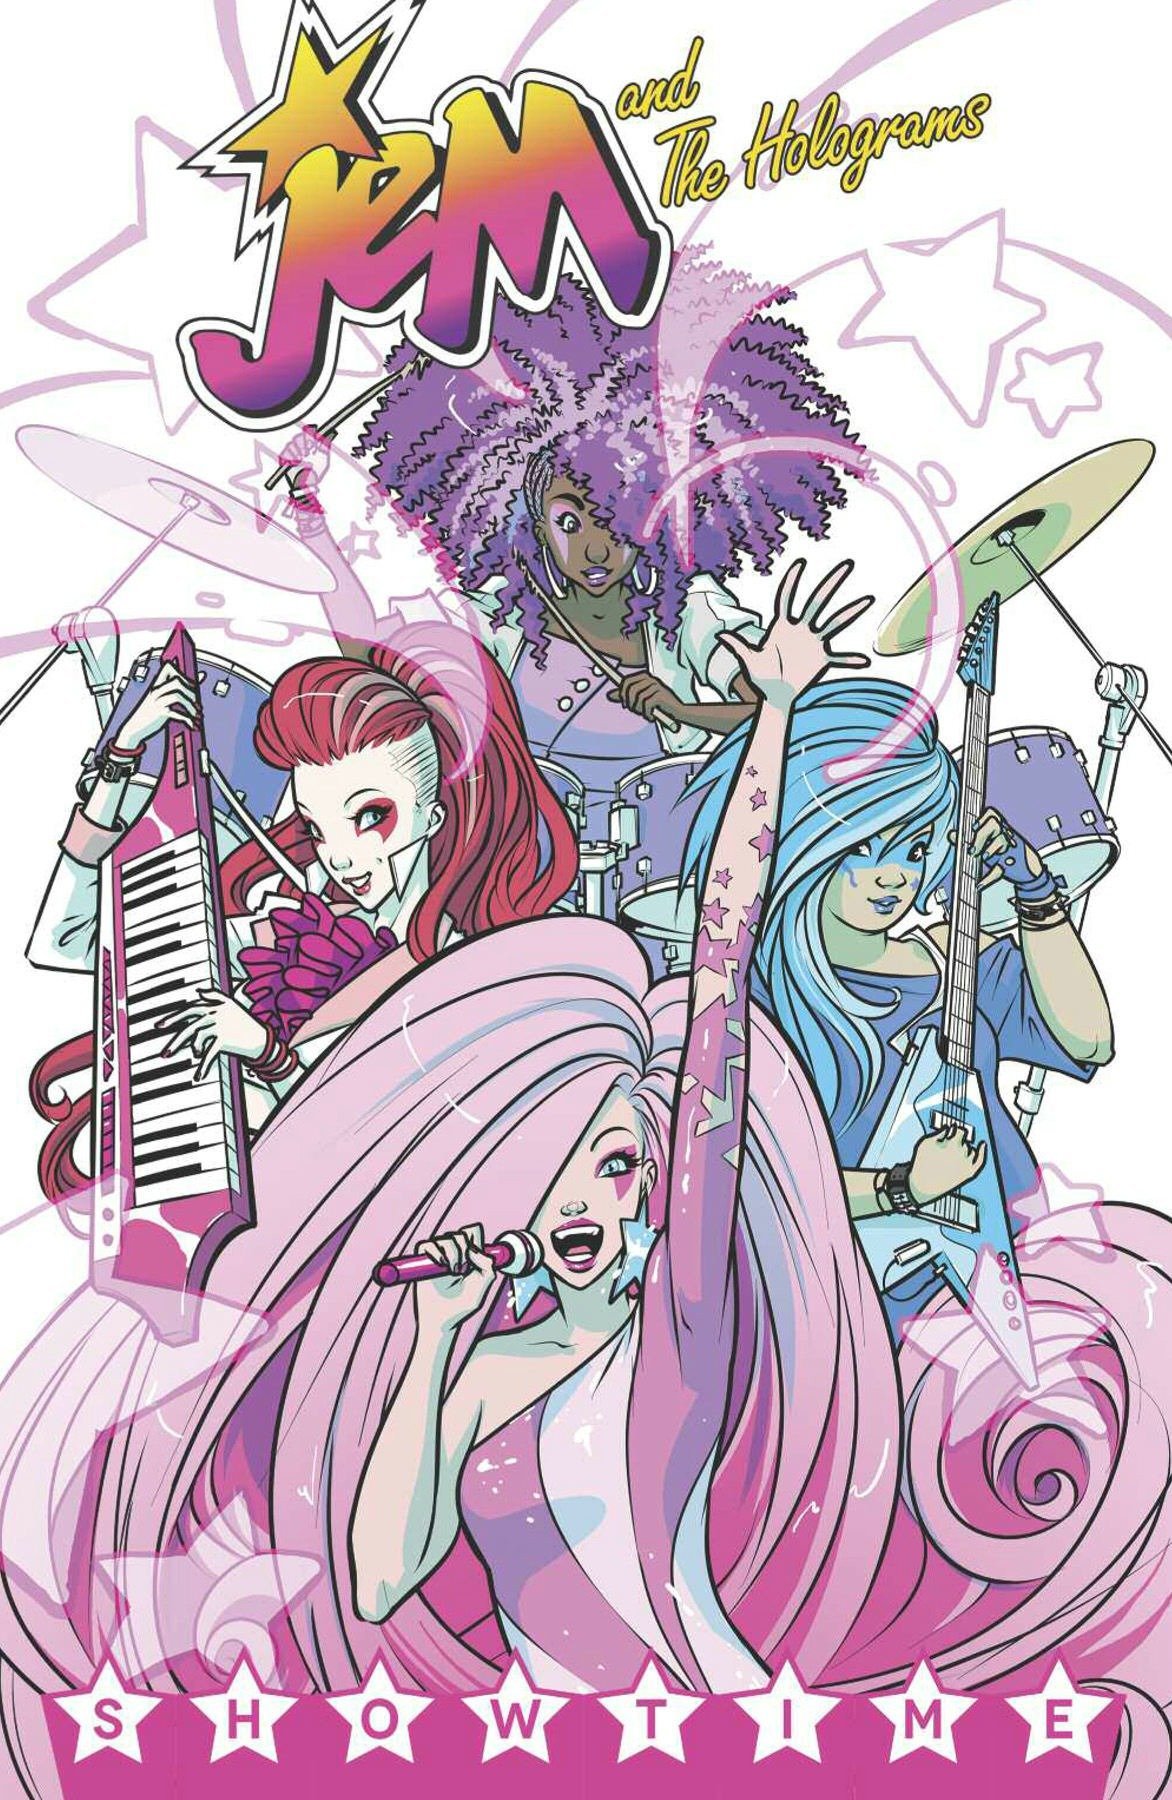 Jem and the Holograms Vol. 1: Showtime